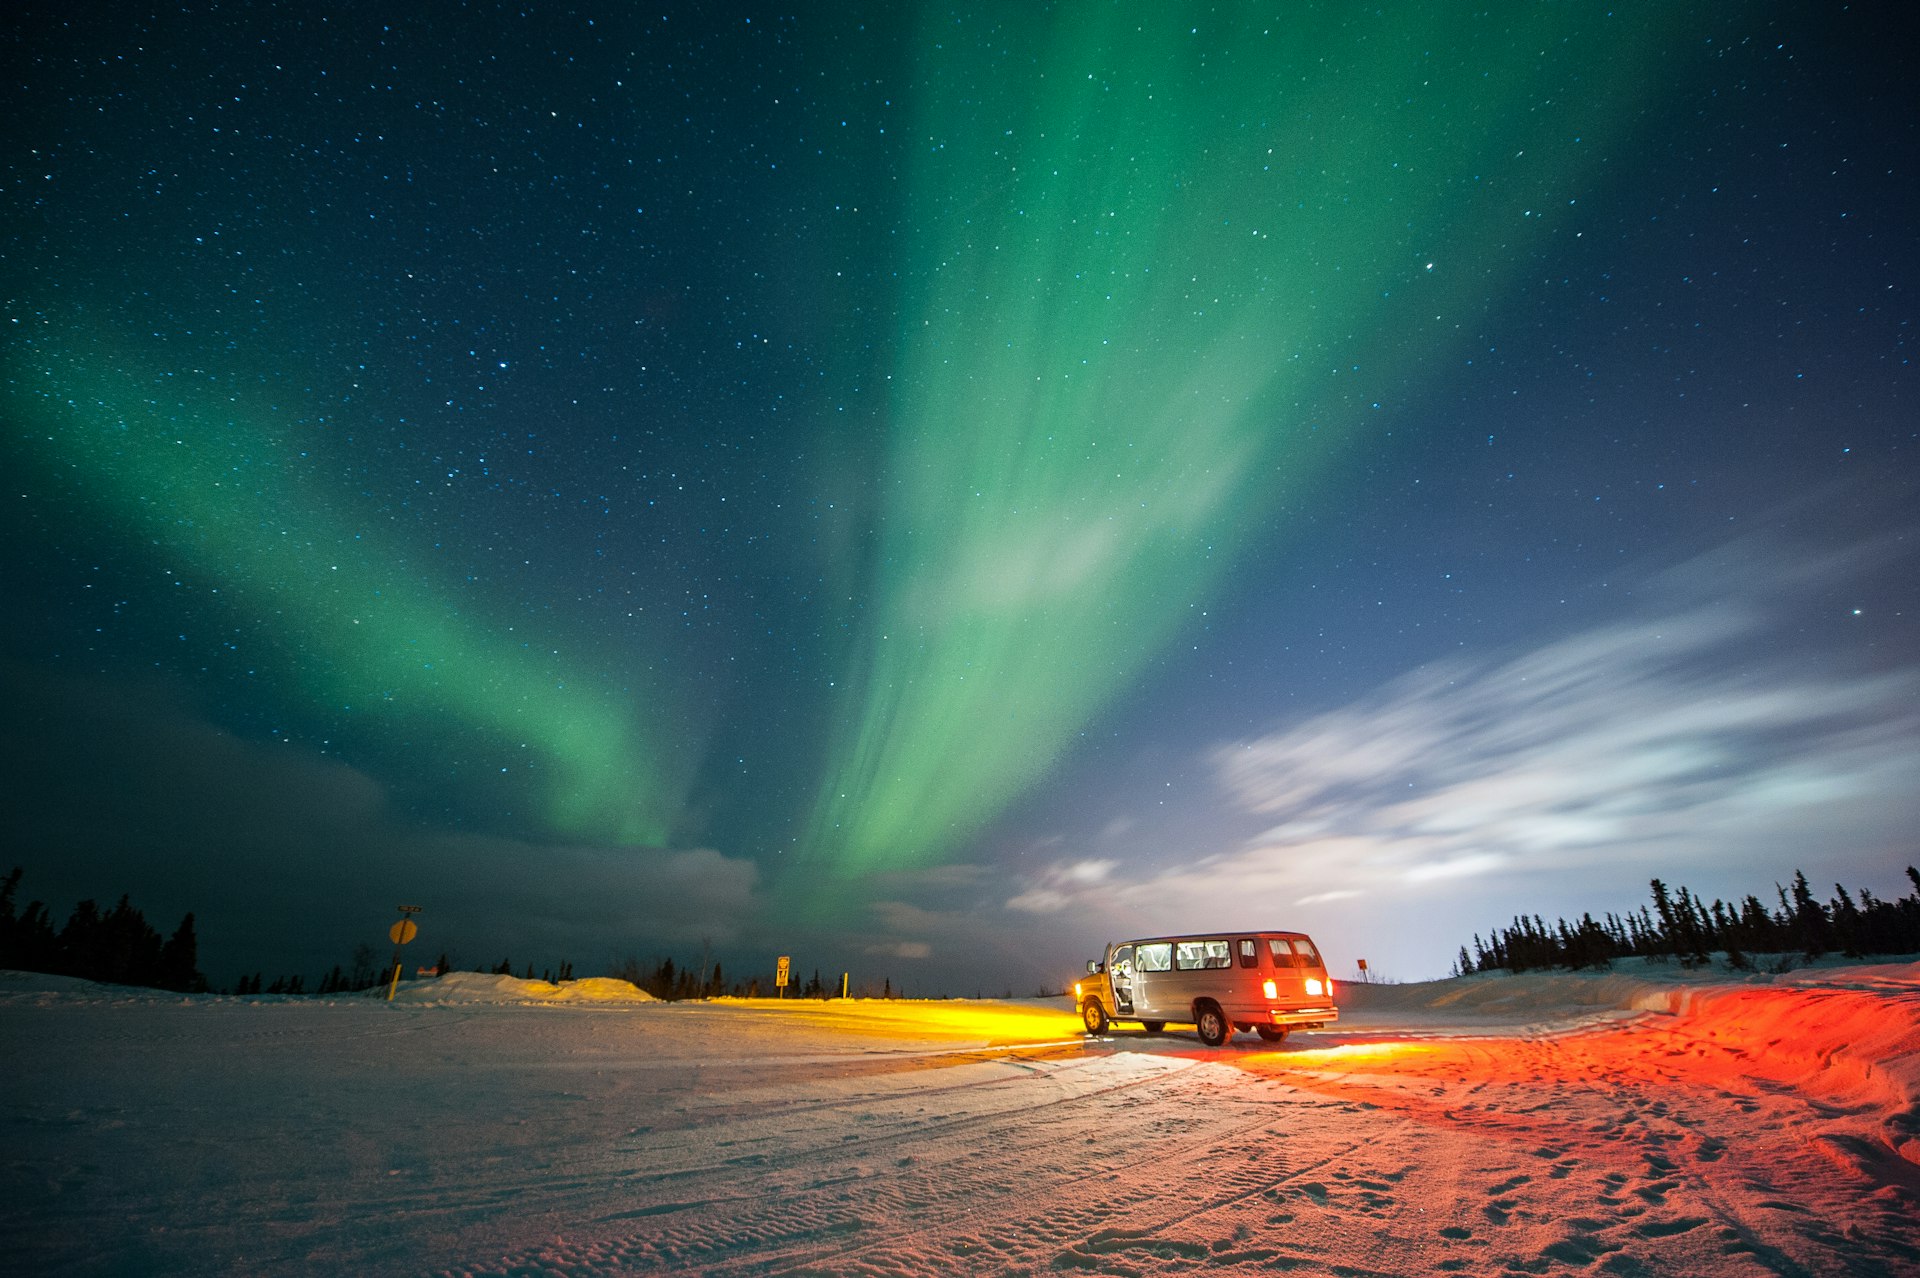 A van is parked with its headlights on, casting an orange glow on the snowy ground, while the aurora borealis lights up the sky with vibrant streaks of green